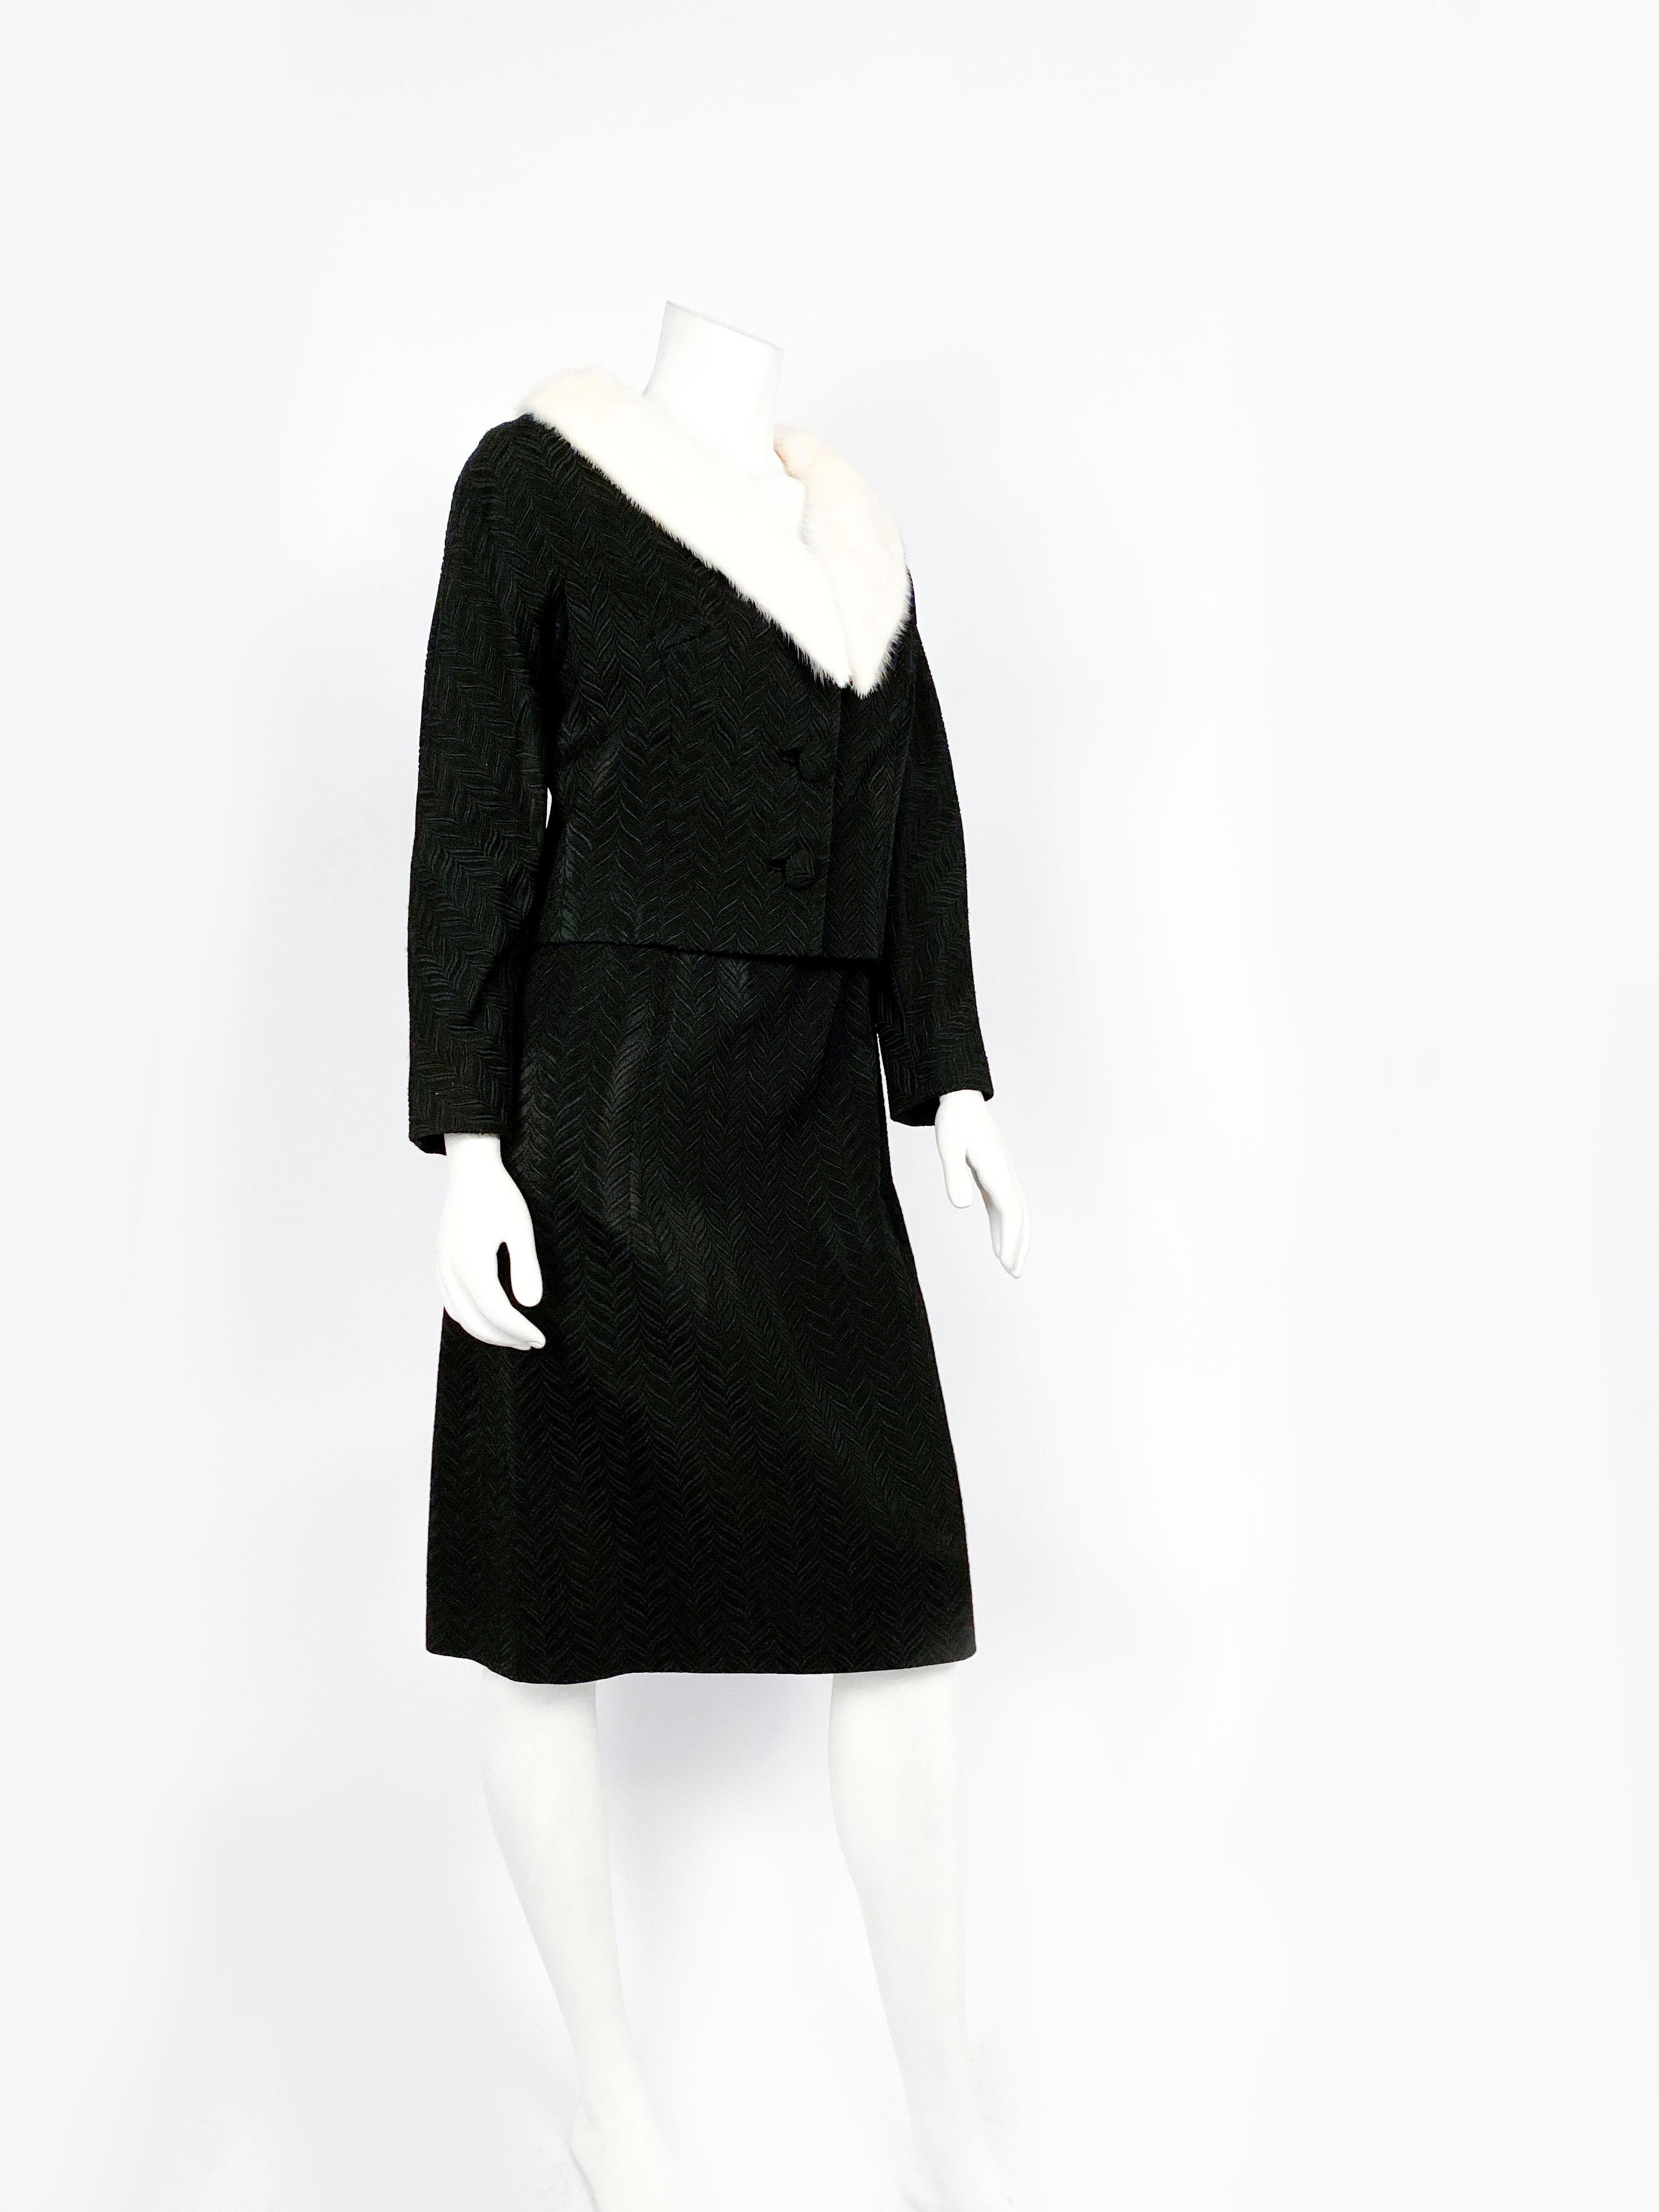 Women's 1950s Black Jacquard Dress with Matching Mink-collared Jacket For Sale